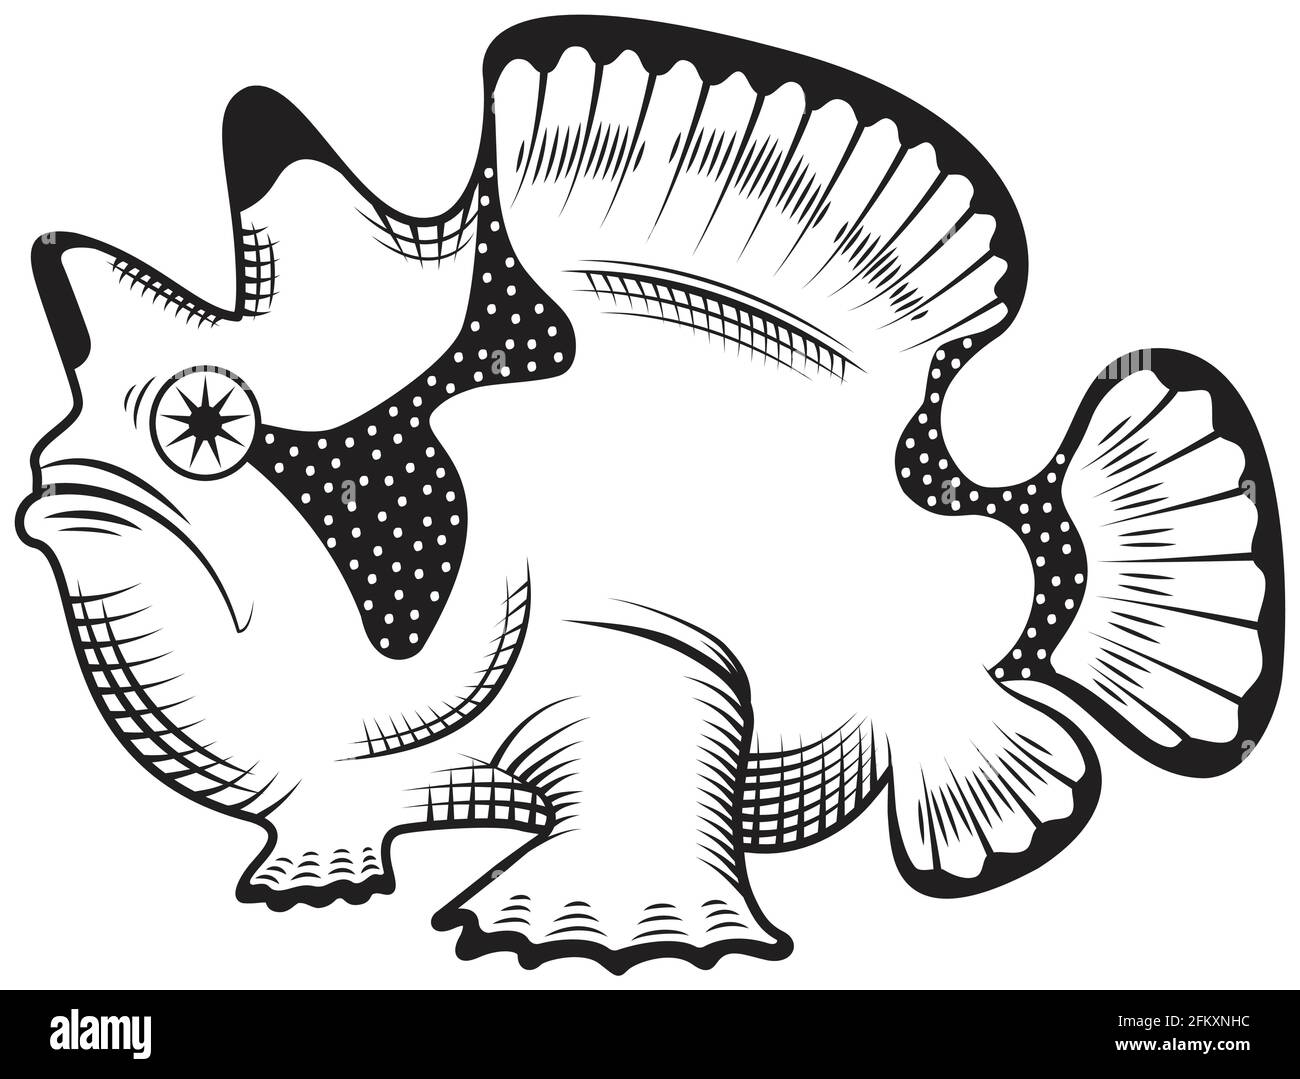 Frog Fish Illustration Vector Image No Background Stock Vector